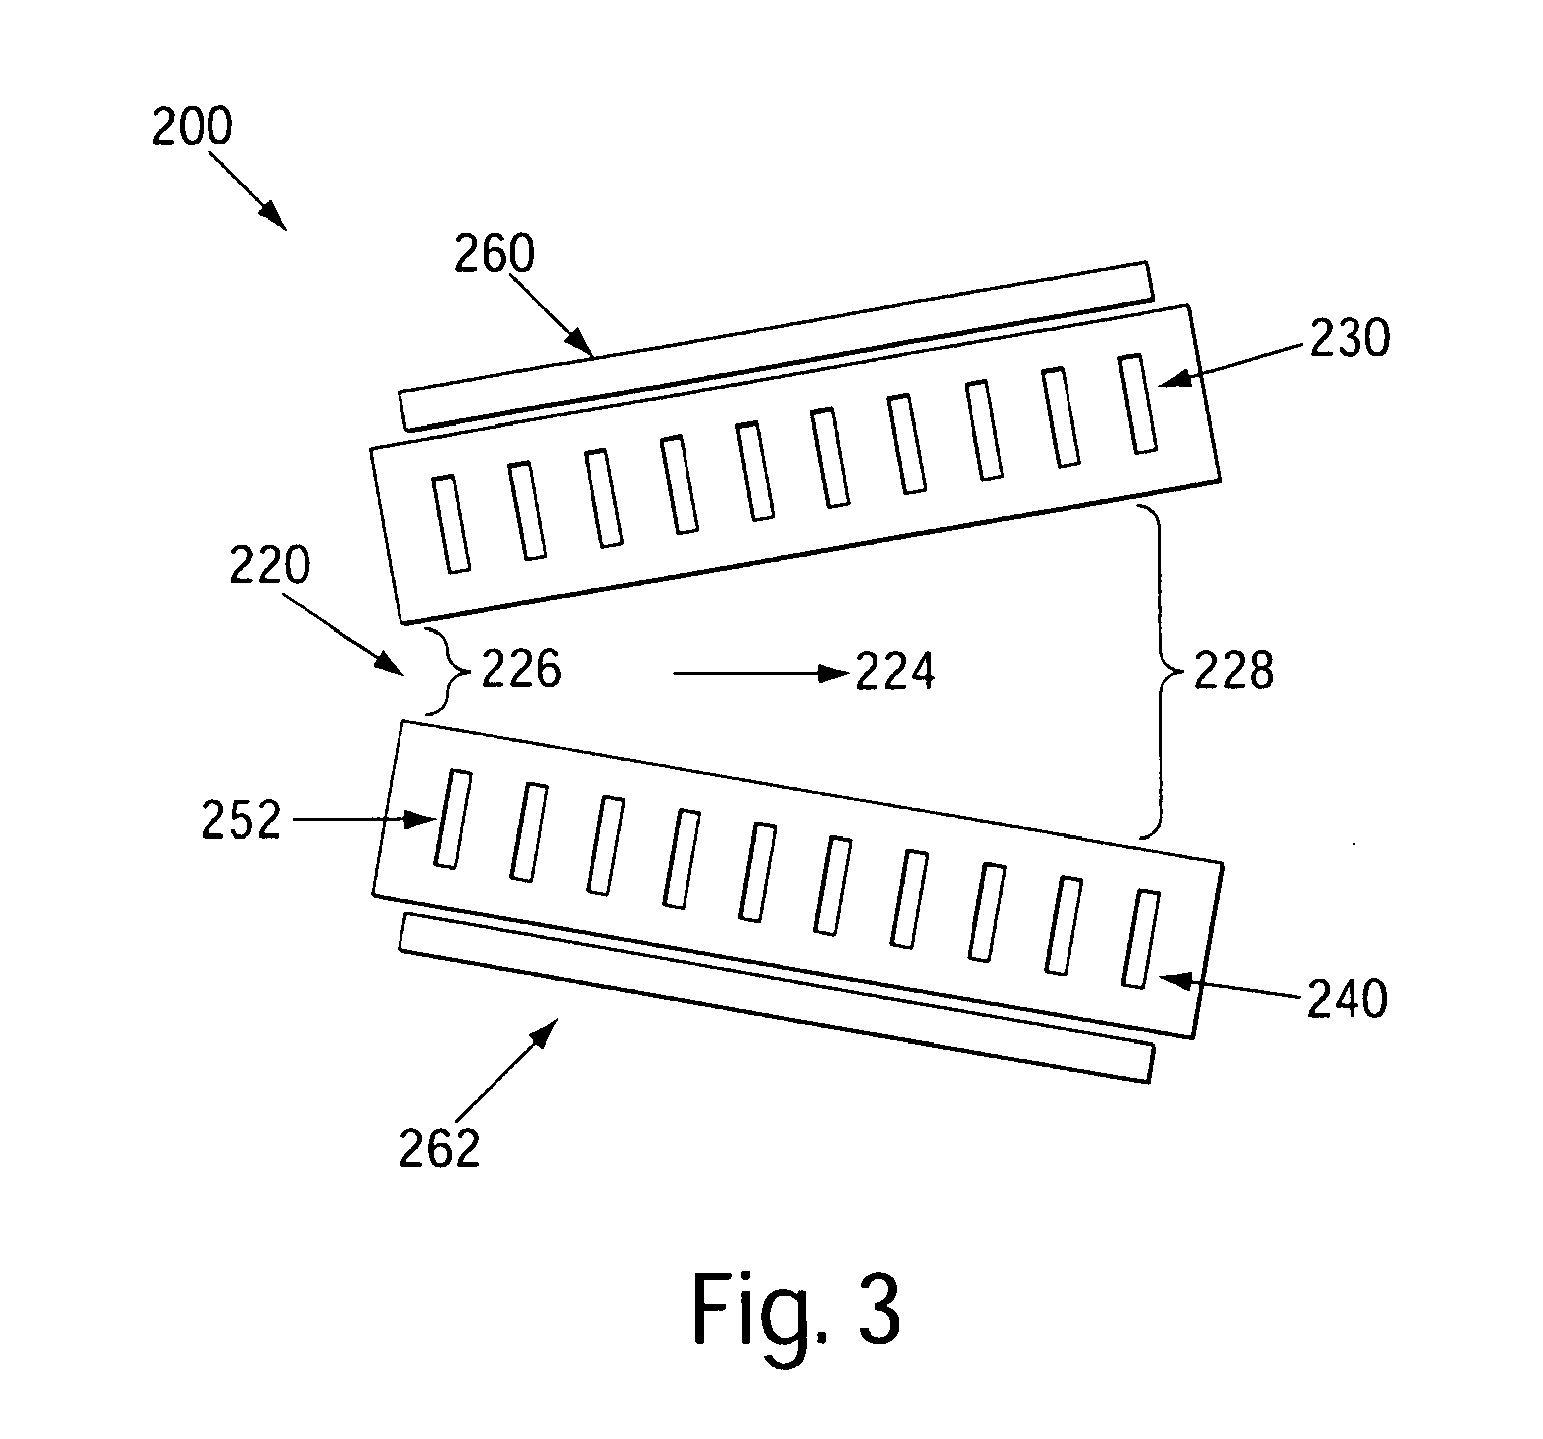 Isoelectric focusing systems and methods